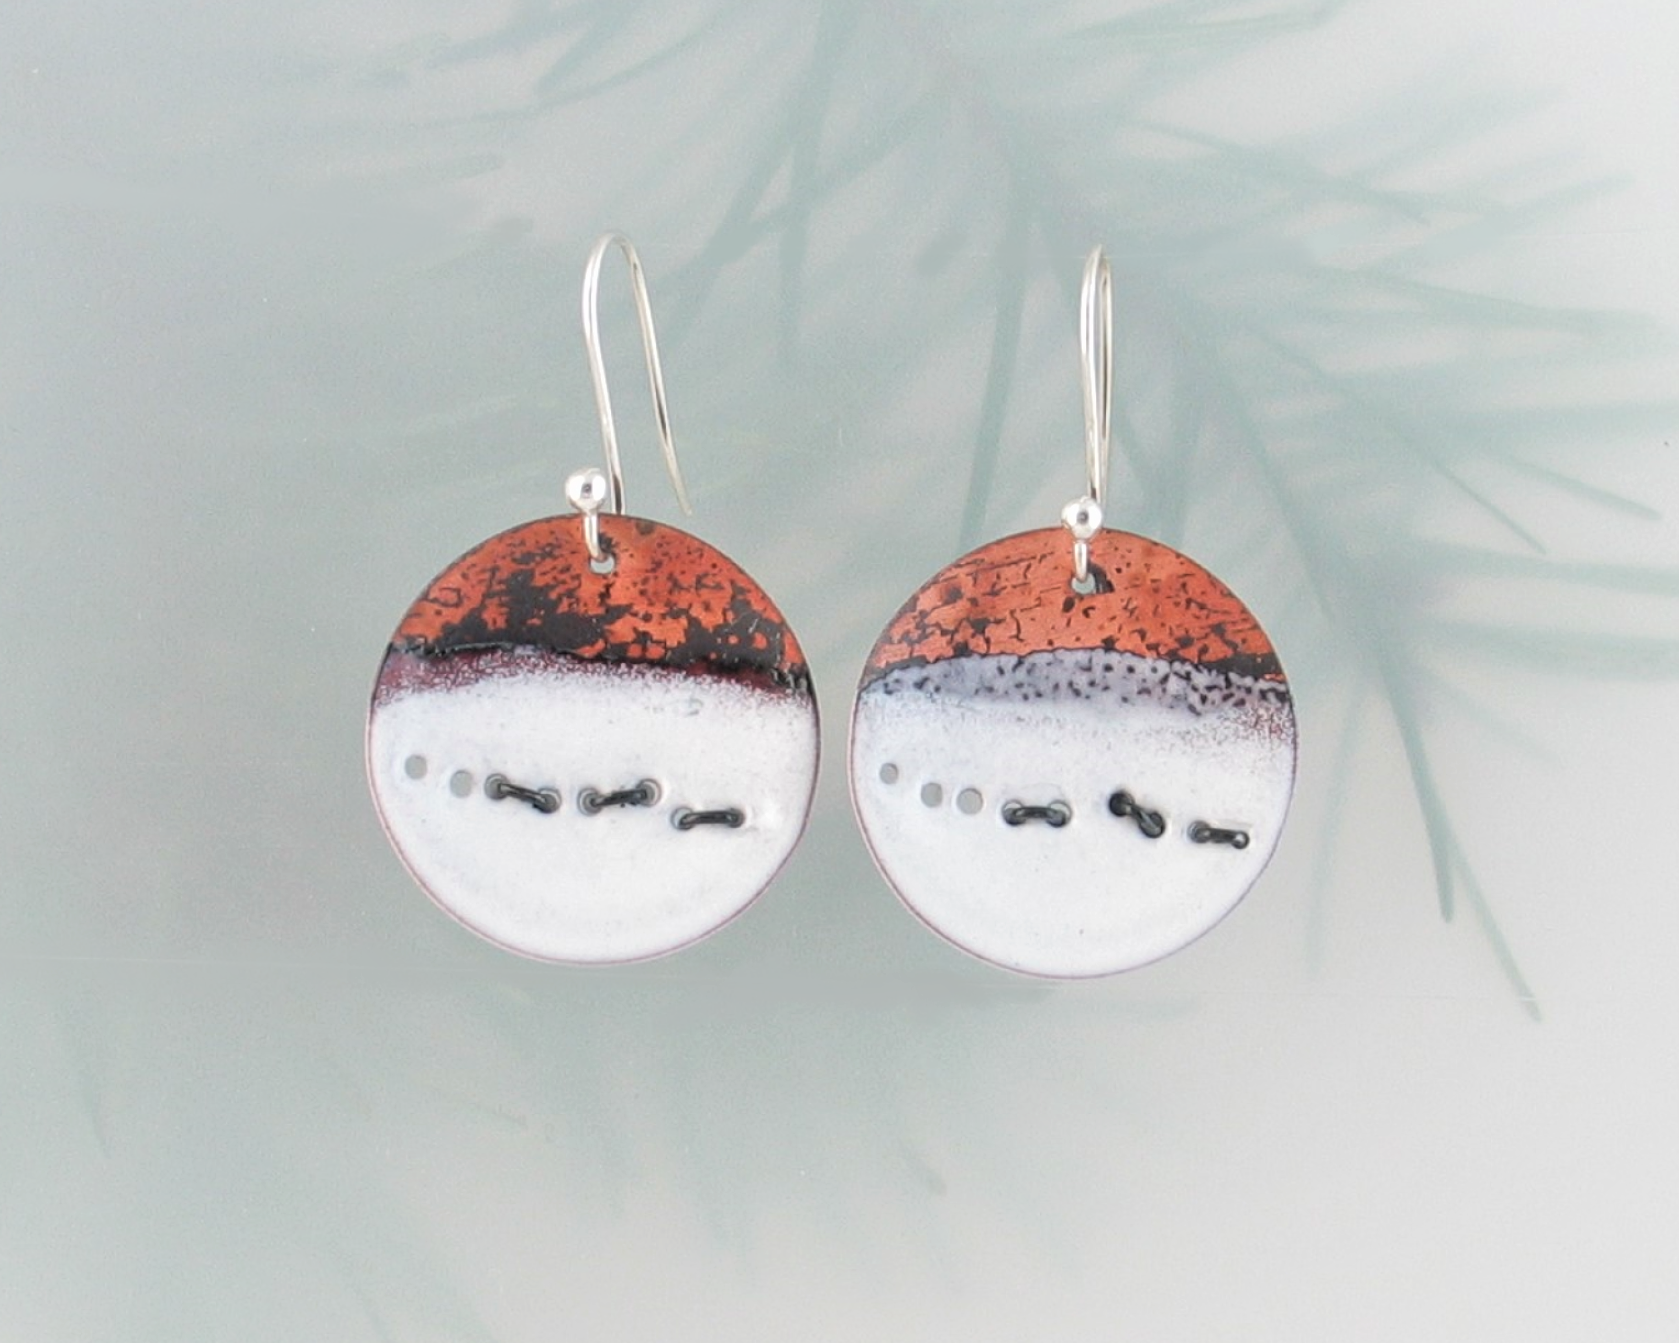 running wolves in snow abstract copper enamel earrings with blackened sterling wire representing running wolves